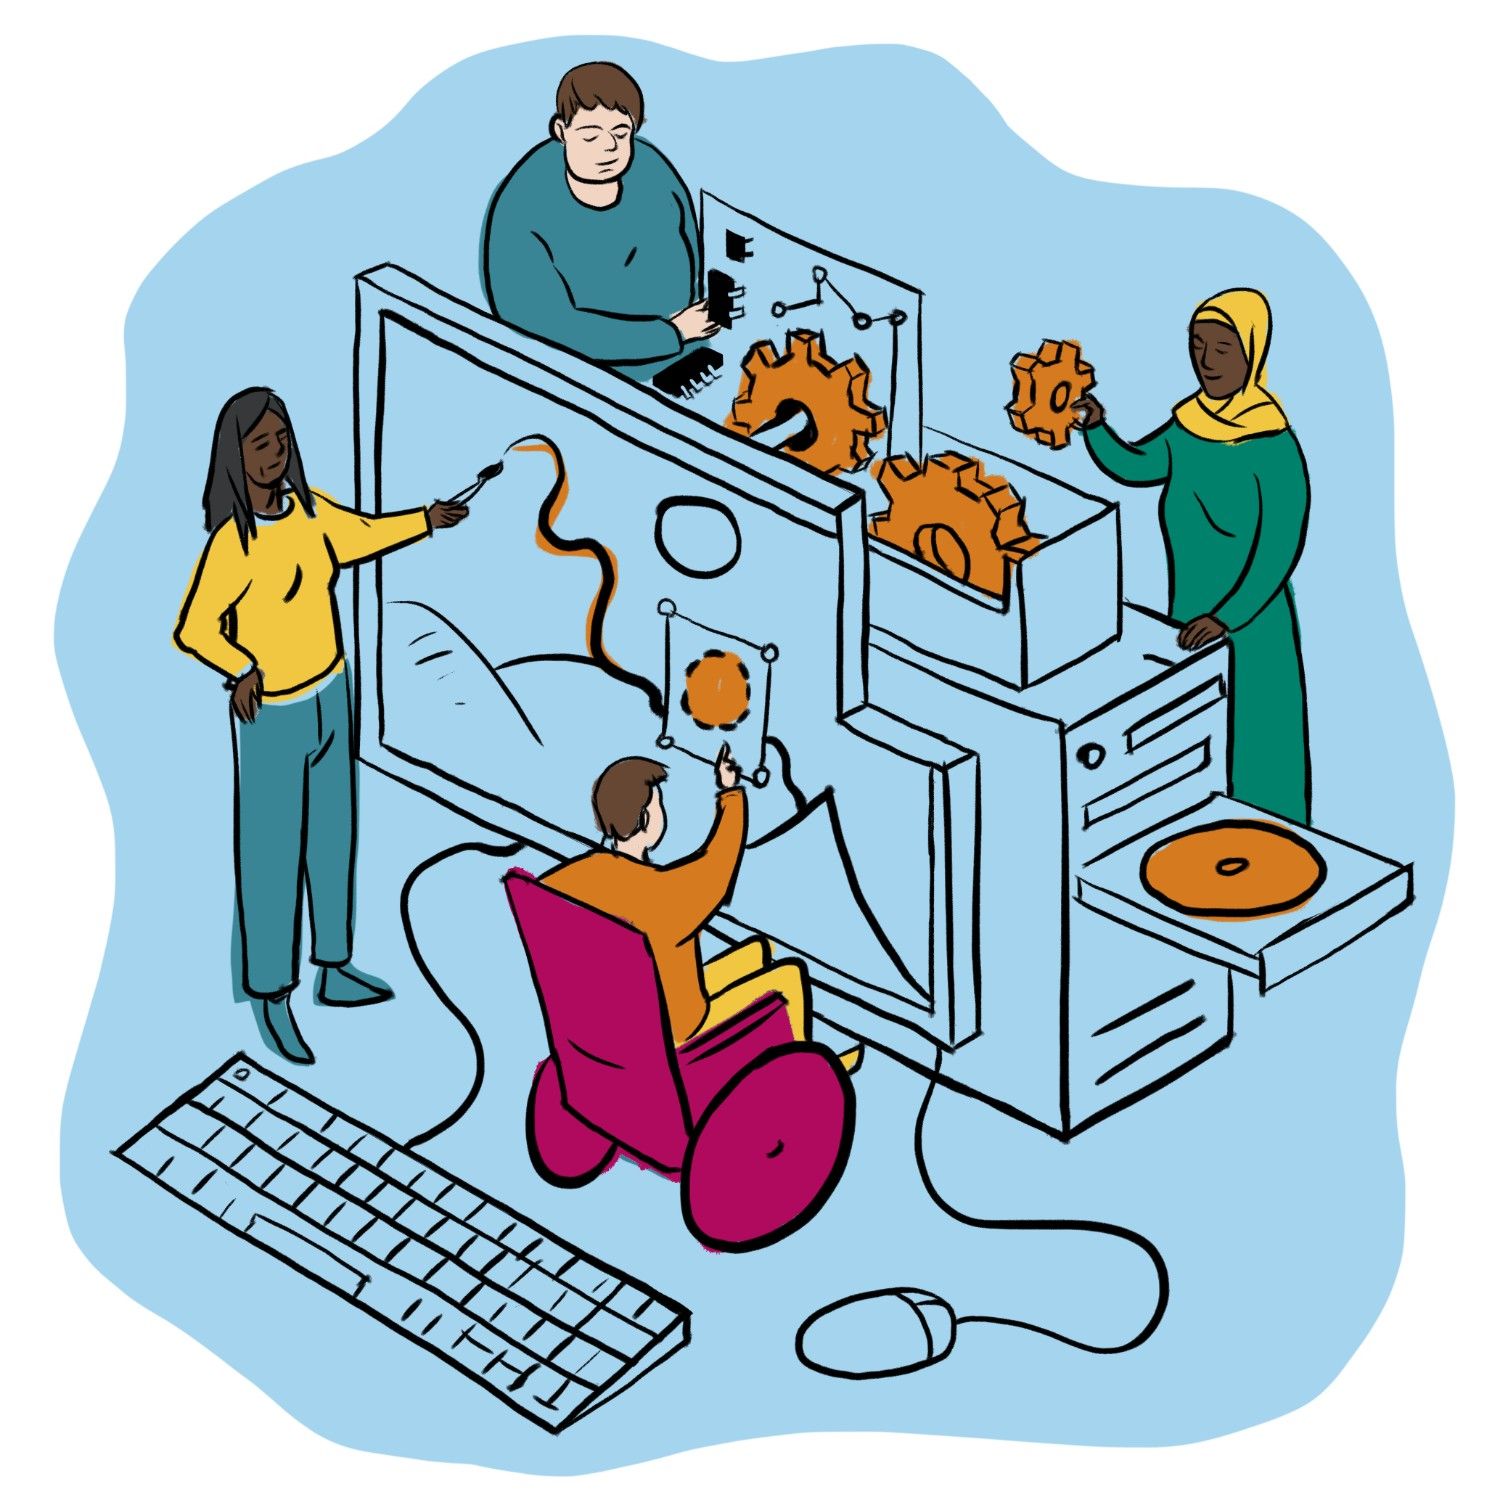 An illustration of a computer being built by several people who participate in the social care system.